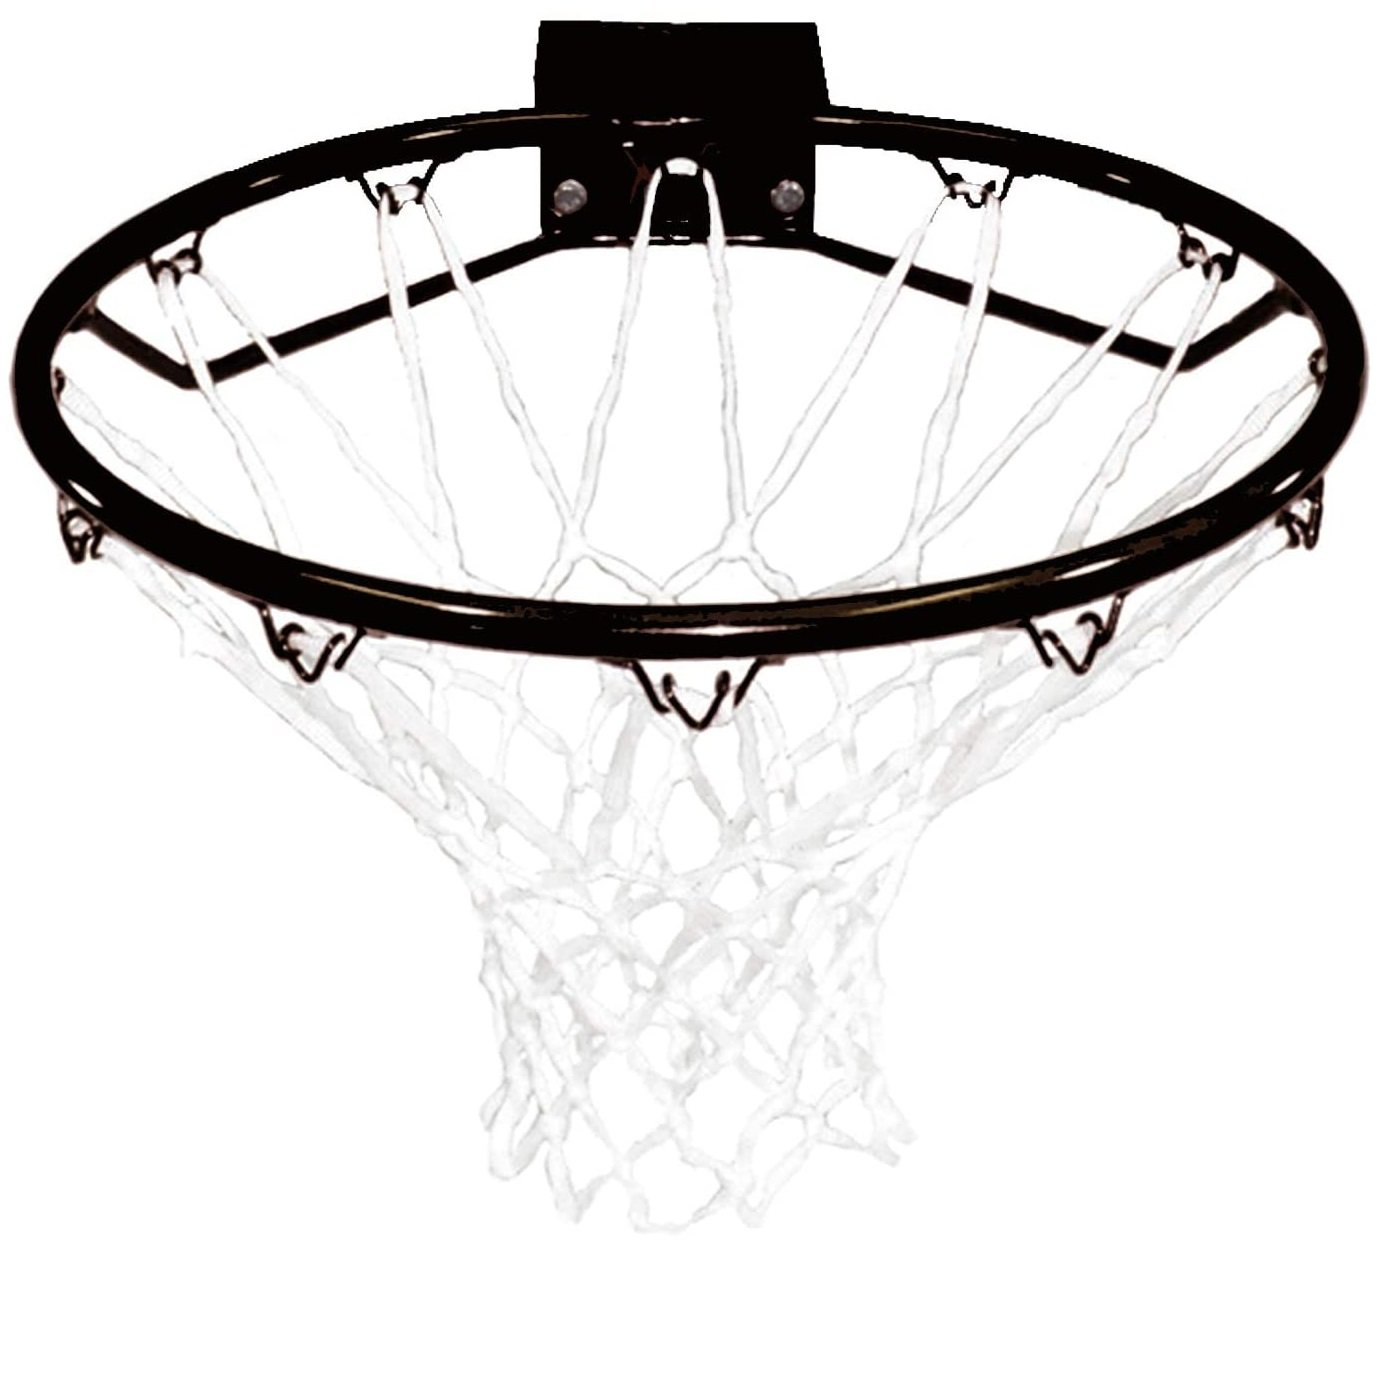 Heavy Duty Wall Mounted Full Size Black Basketball Hoop Rim and